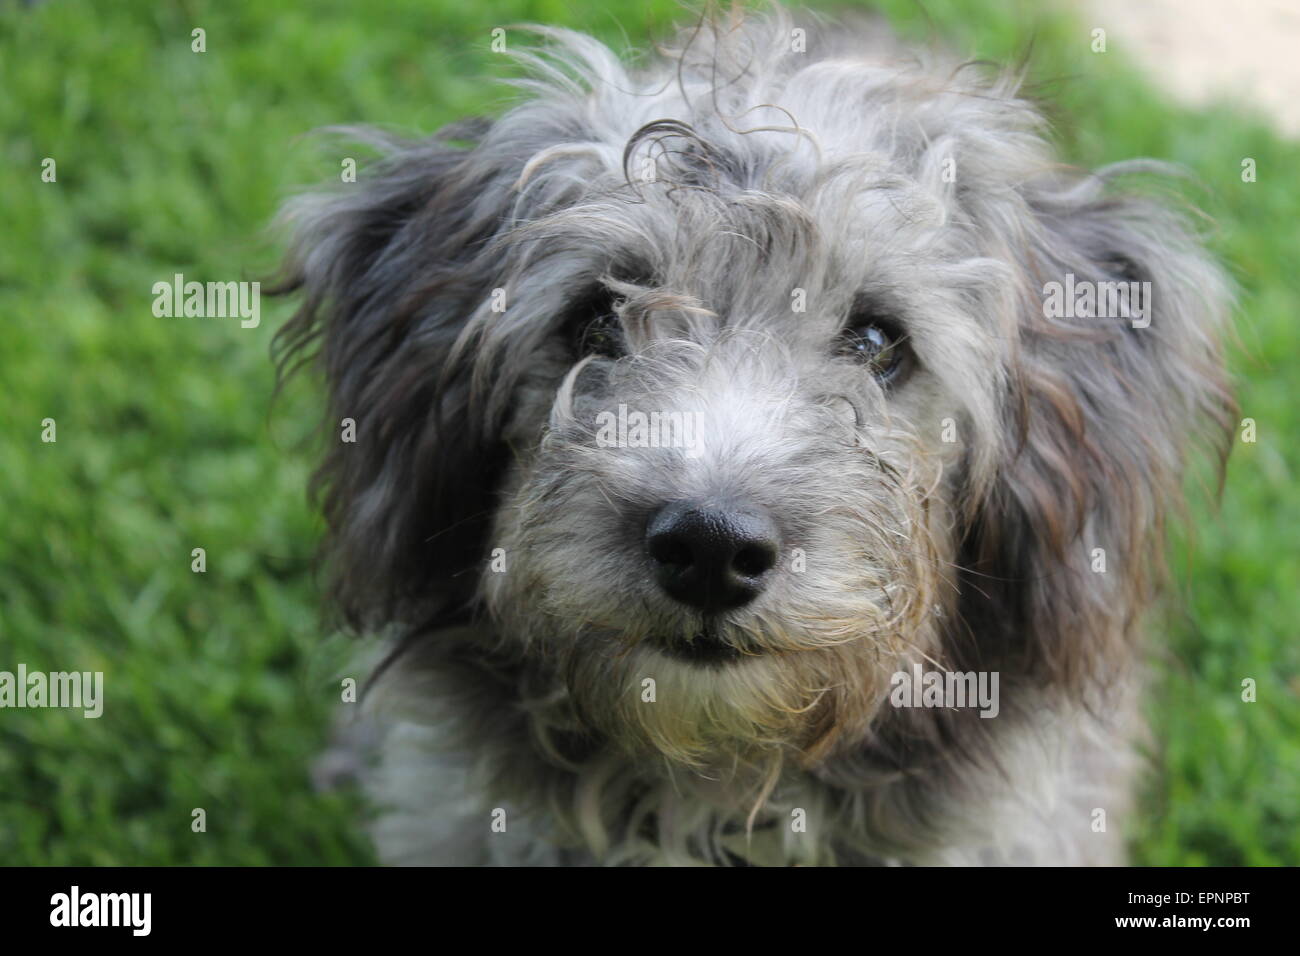 border terrier toy poodle cross